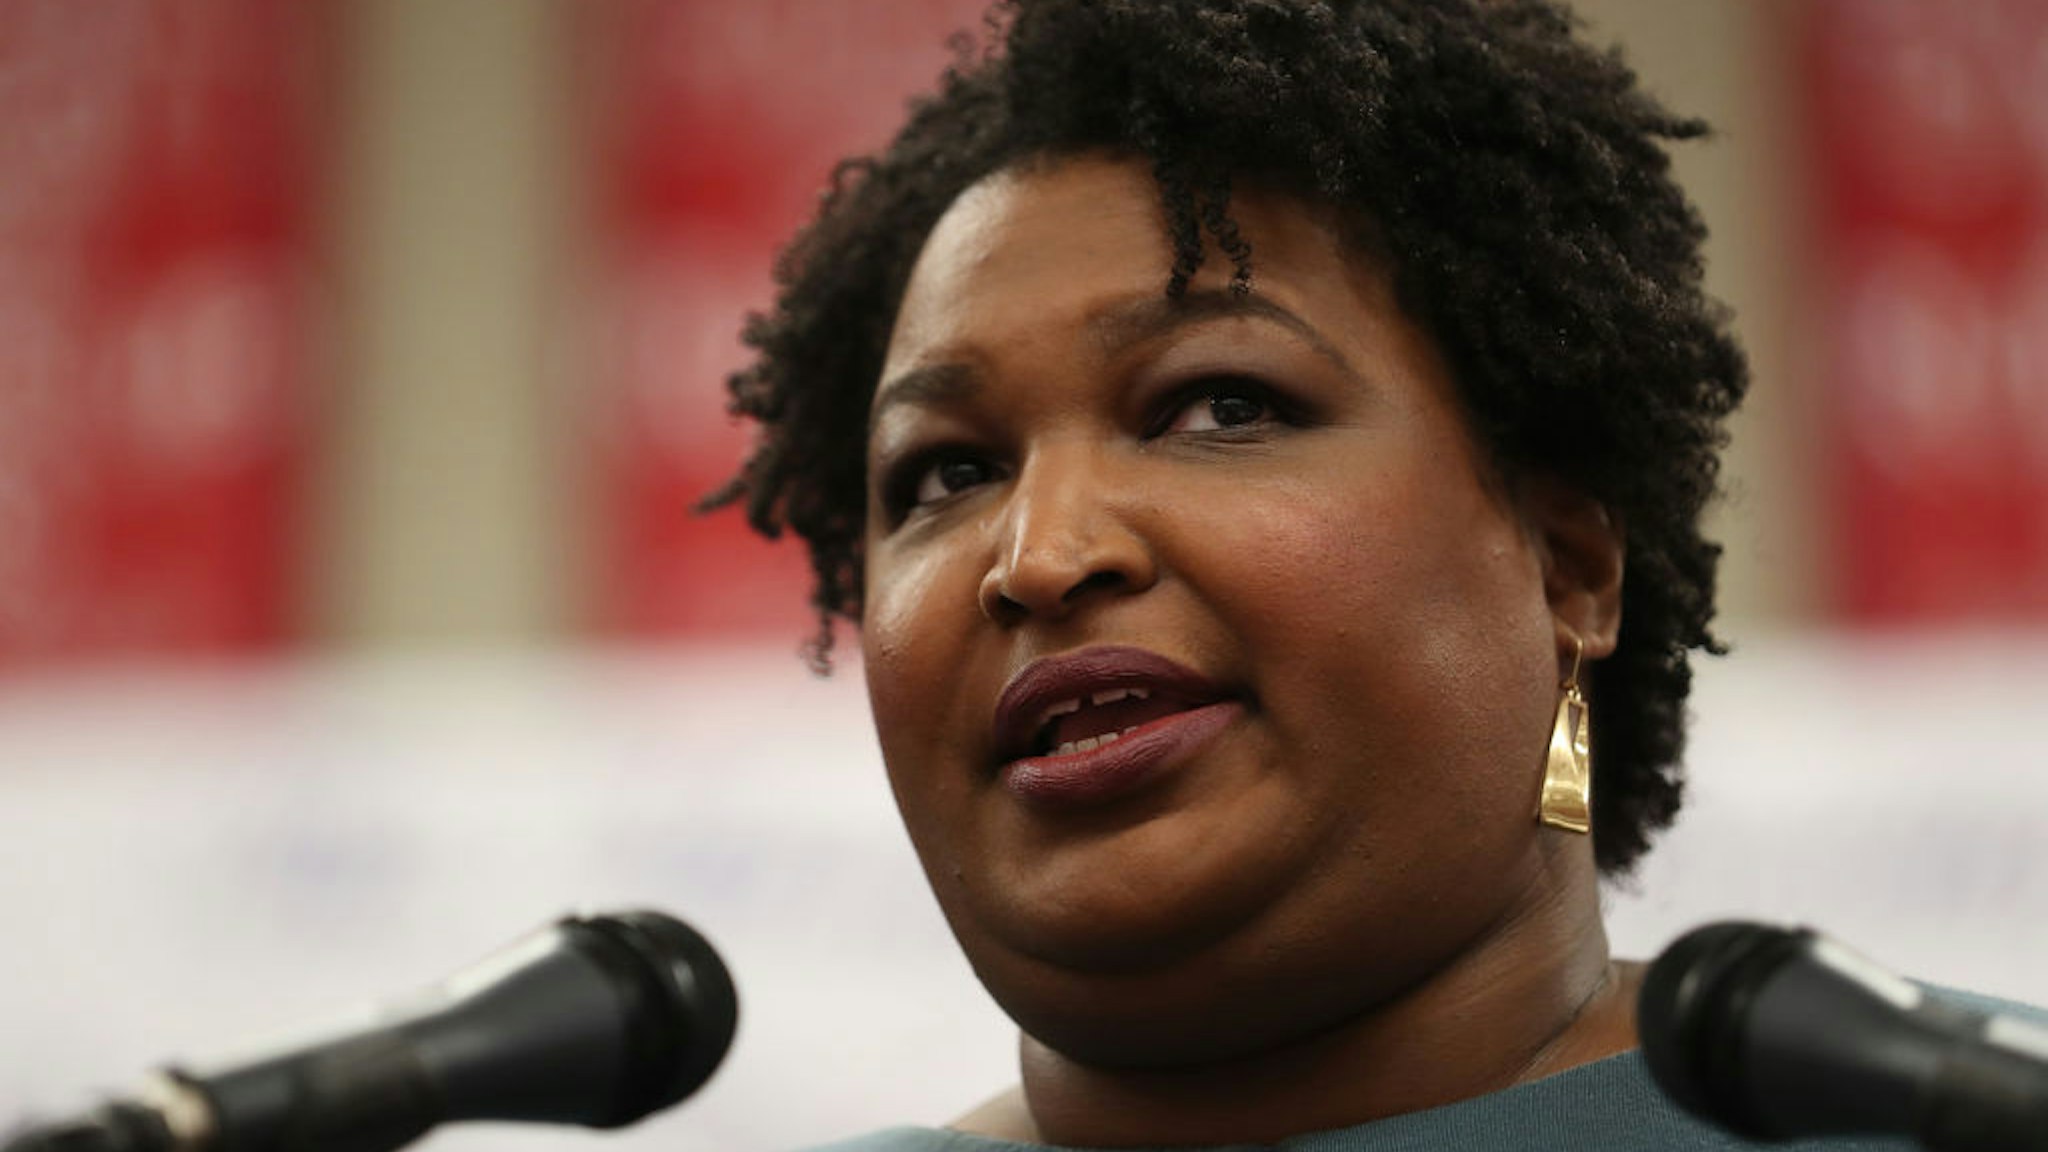 SELMA, AL - MARCH 01: Stacey Abrams speaks during the Martin &amp; Coretta S. King Unity Breakfast on March 1, 2020 in Selma, Alabama. Presidential candidates and their supporters continue to campaign before voting starts on Super Tuesday, March 3. (Photo by Joe Raedle/Getty Images)